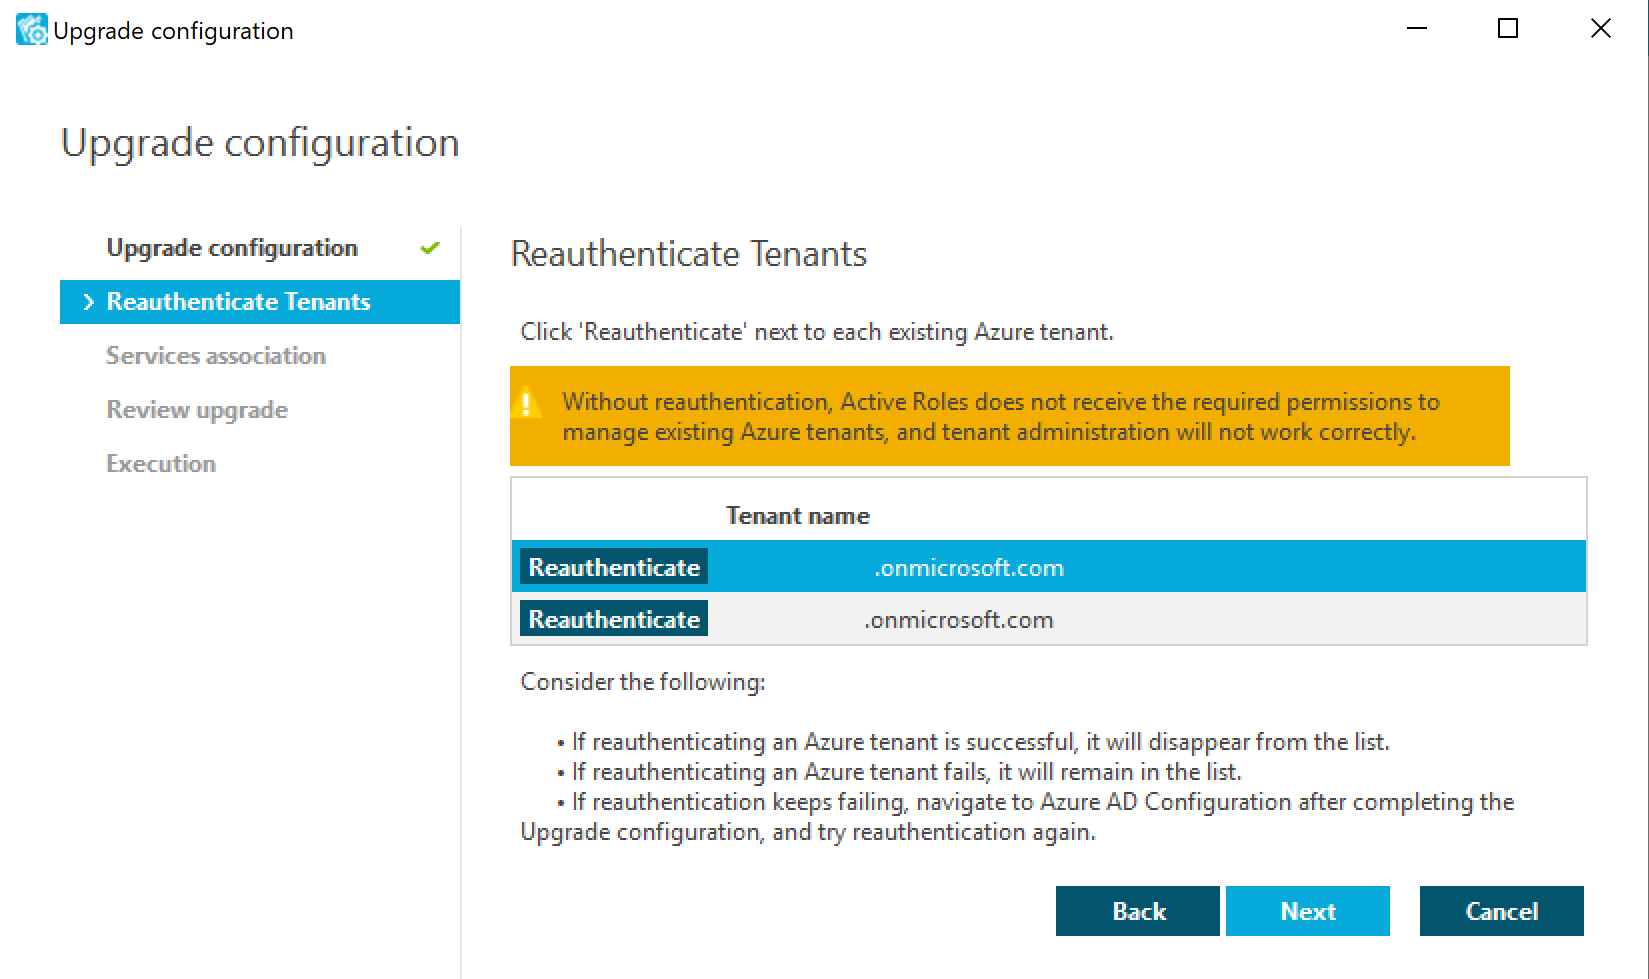 Reauthenticating Azure tenants in the Upgrade configuration wizard of the Configuration Center.